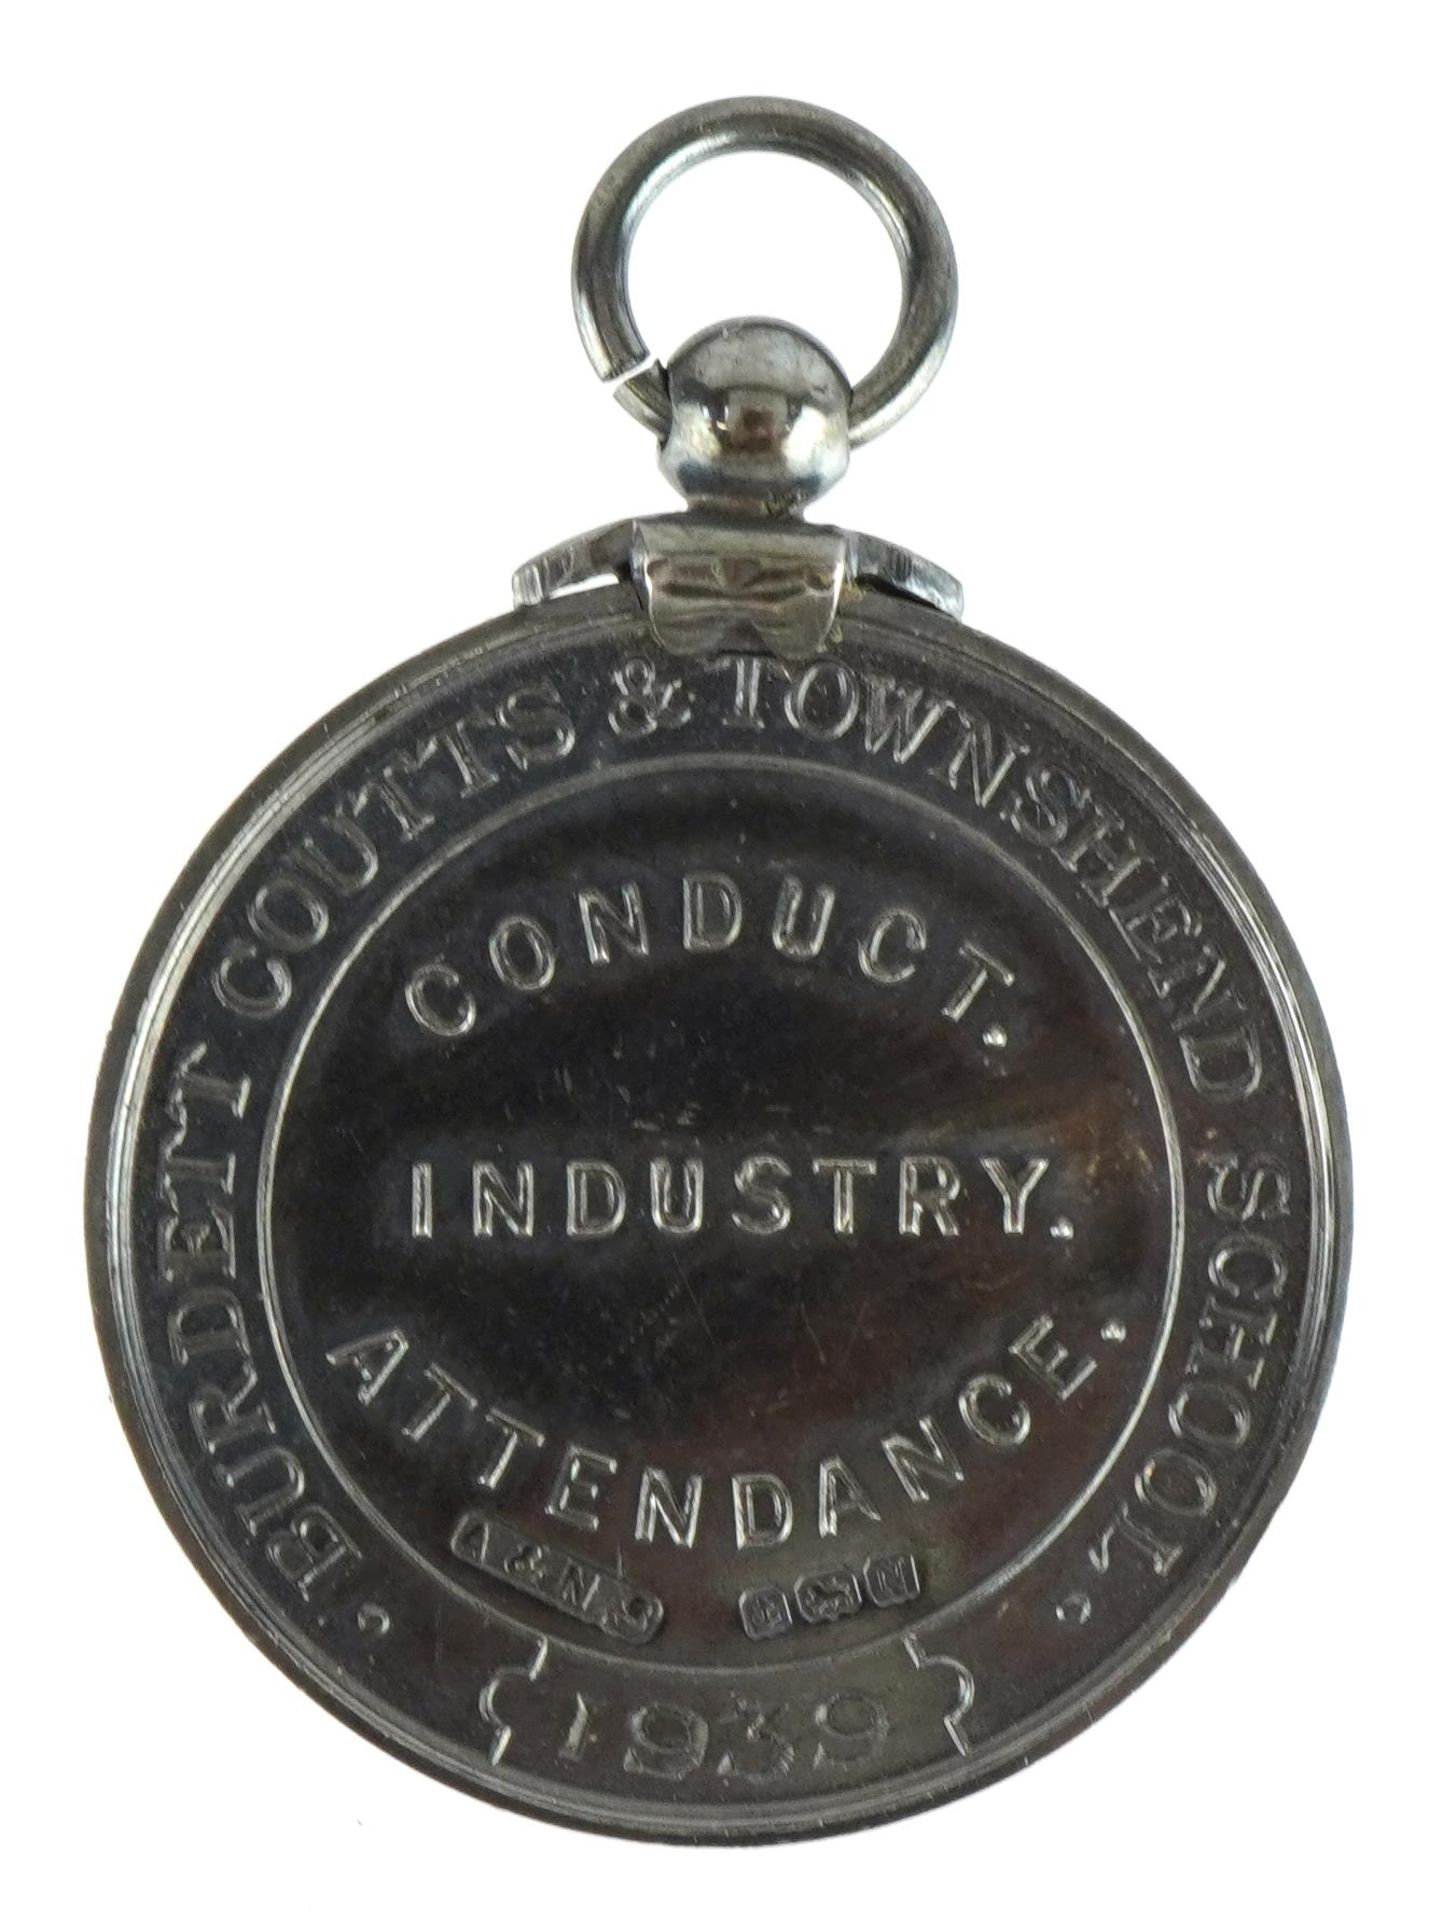 Silver Burdett Coutts & Townshend School Conduct Industry Attendance jewel with fitted case, 4cm - Image 2 of 4